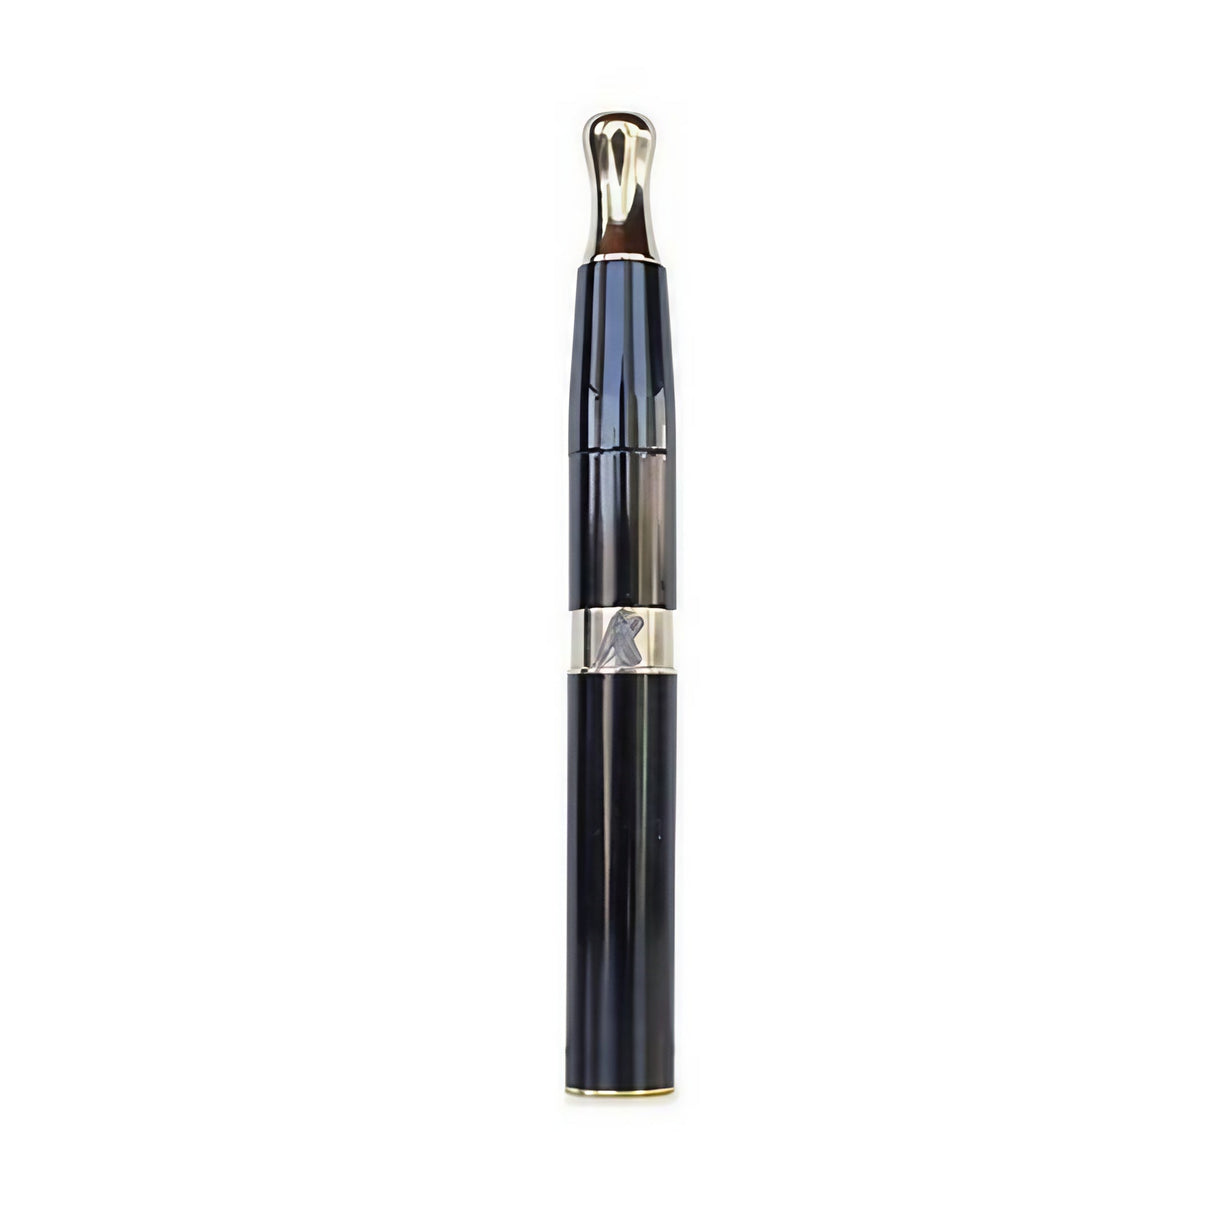 KandyPens Galaxy Vape Pen in Black with Titanium Coils for Dab/Wax, Portable Design